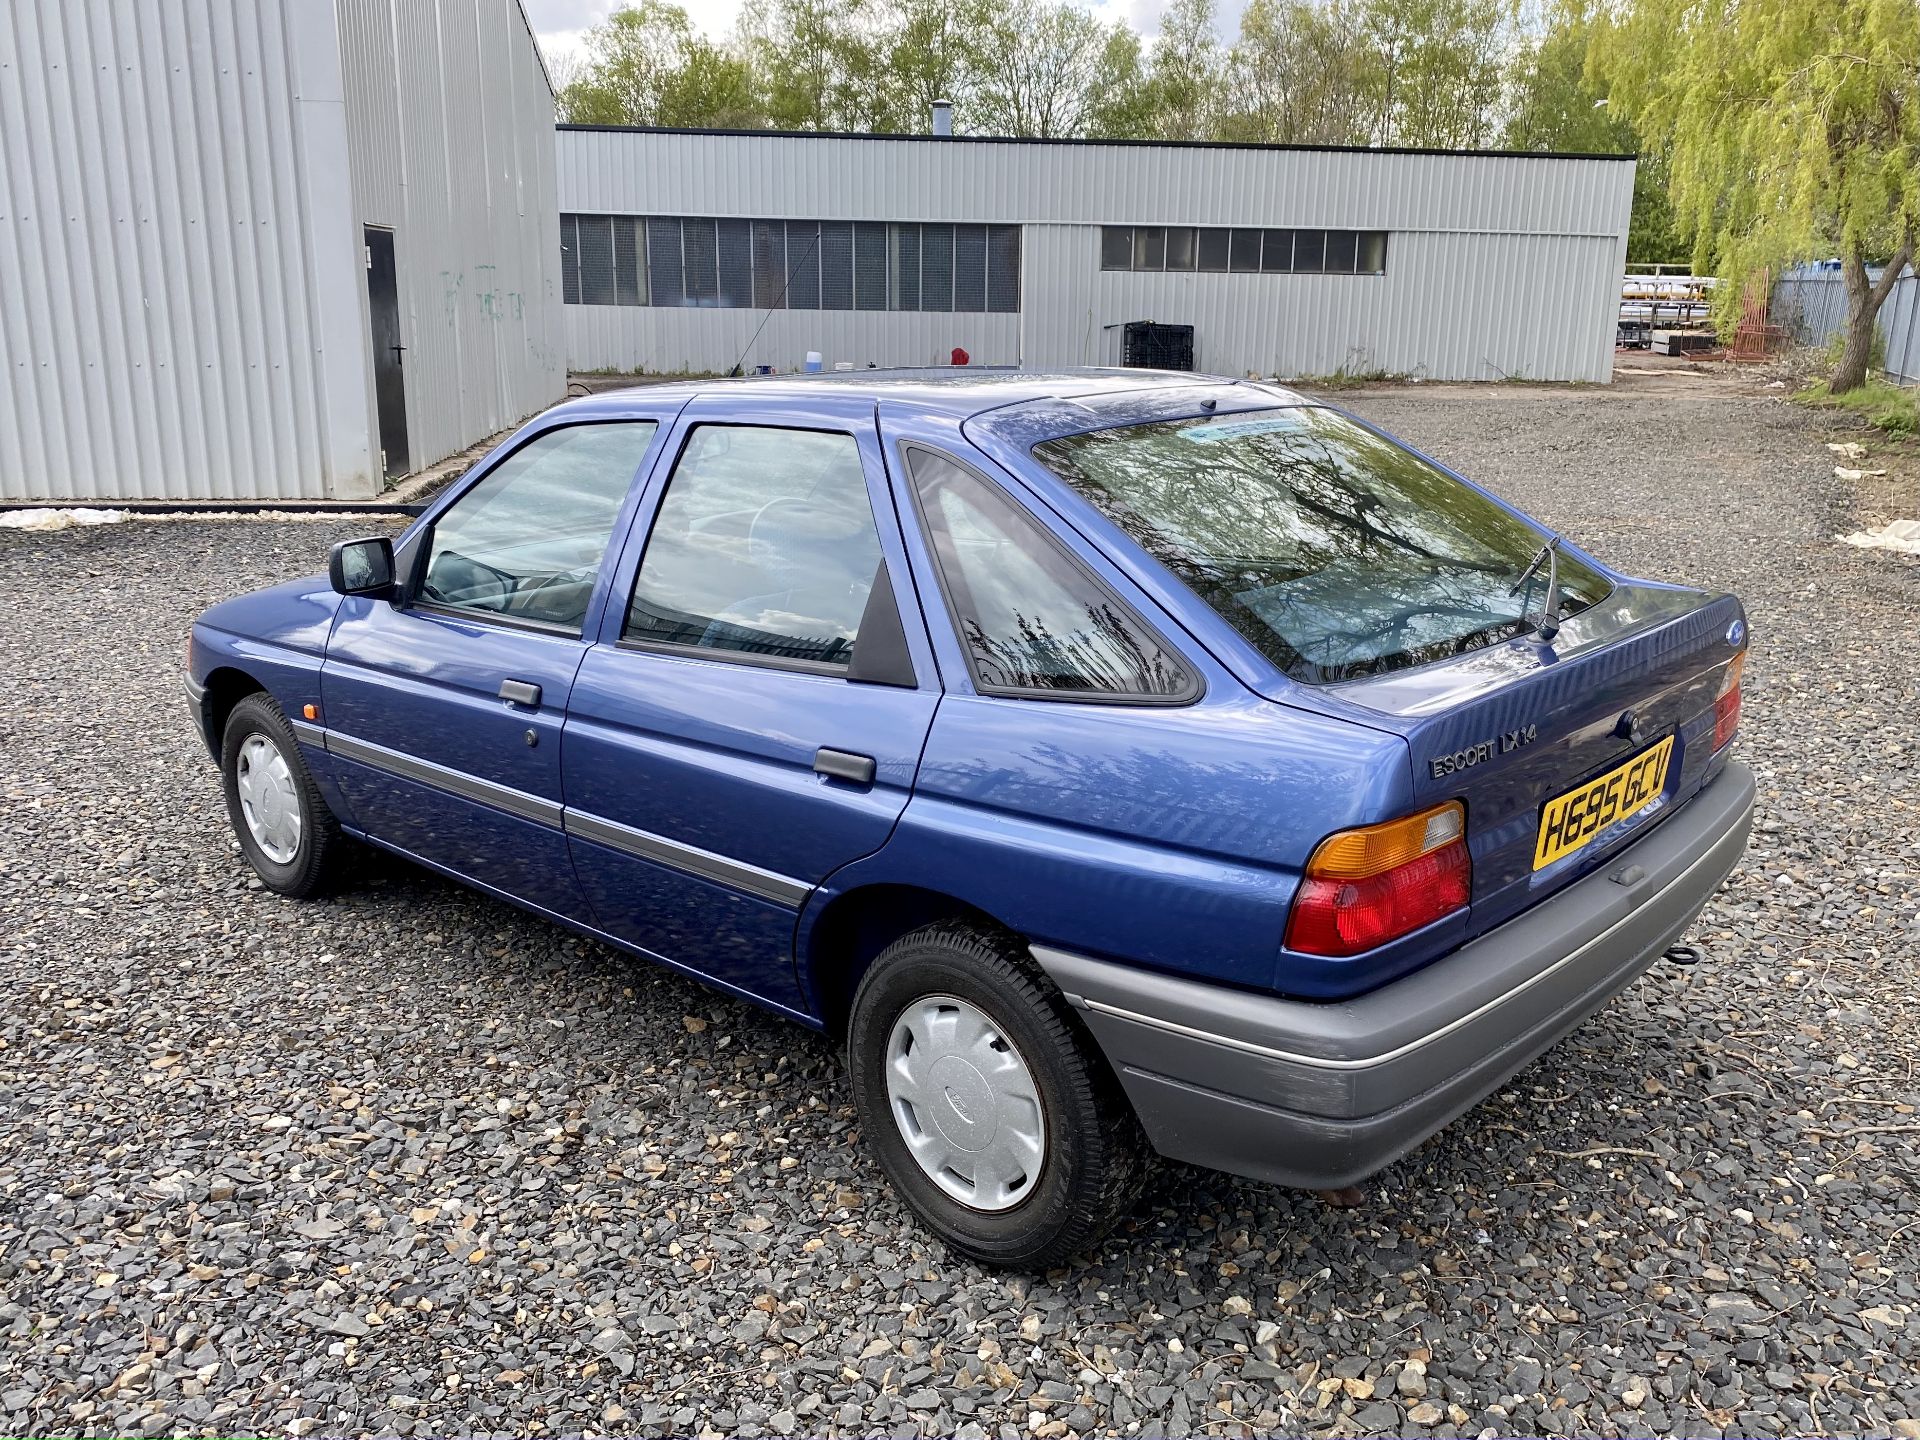 Ford Escort LX1.4 - Image 14 of 54